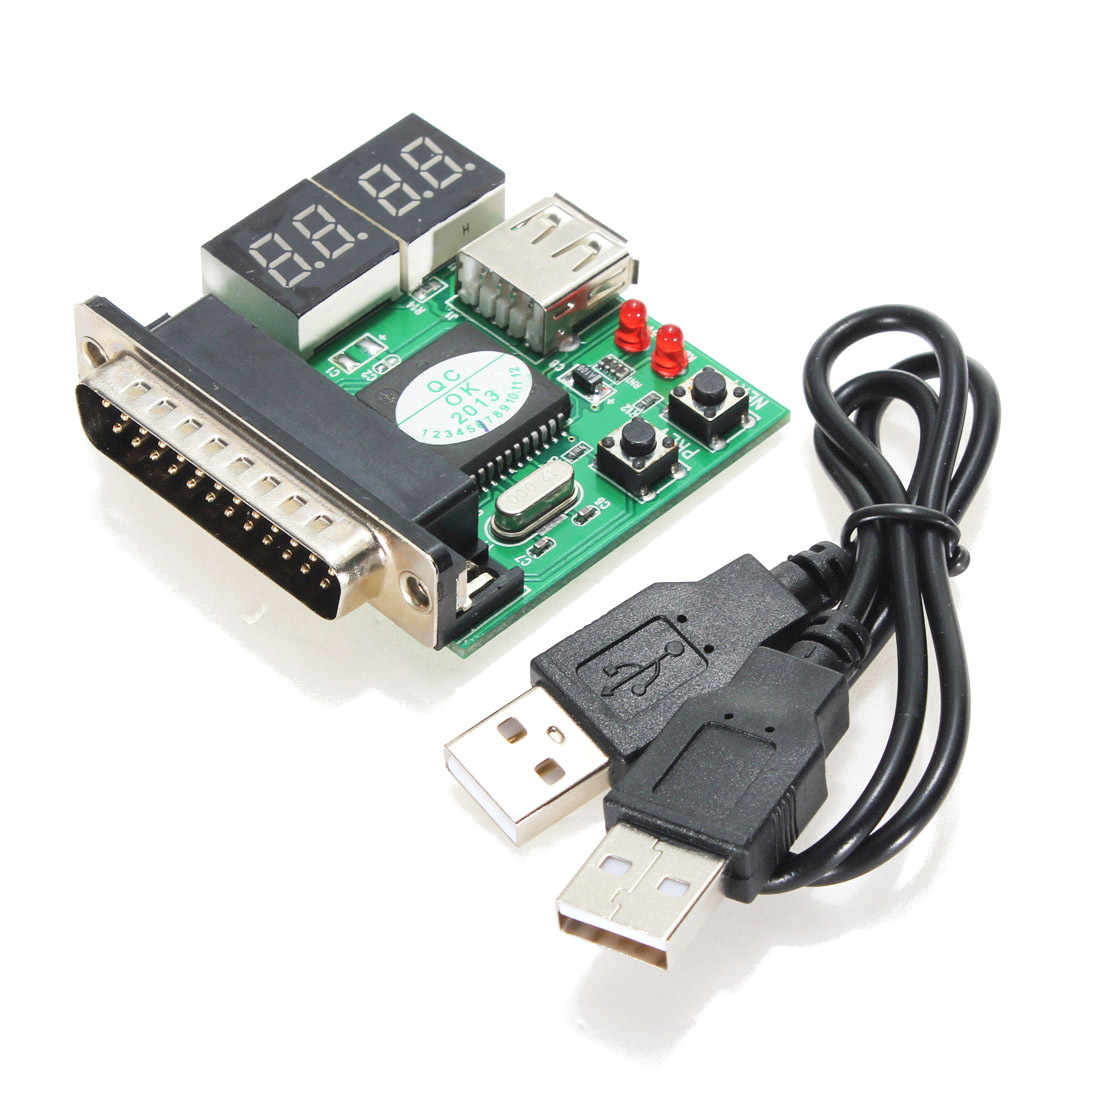 Computer-Accessories-PC-Diagnostic-Card-USB-Post-Card-Motherboard-Analyzer-Tester-for-Notebook-Lapto-1508643